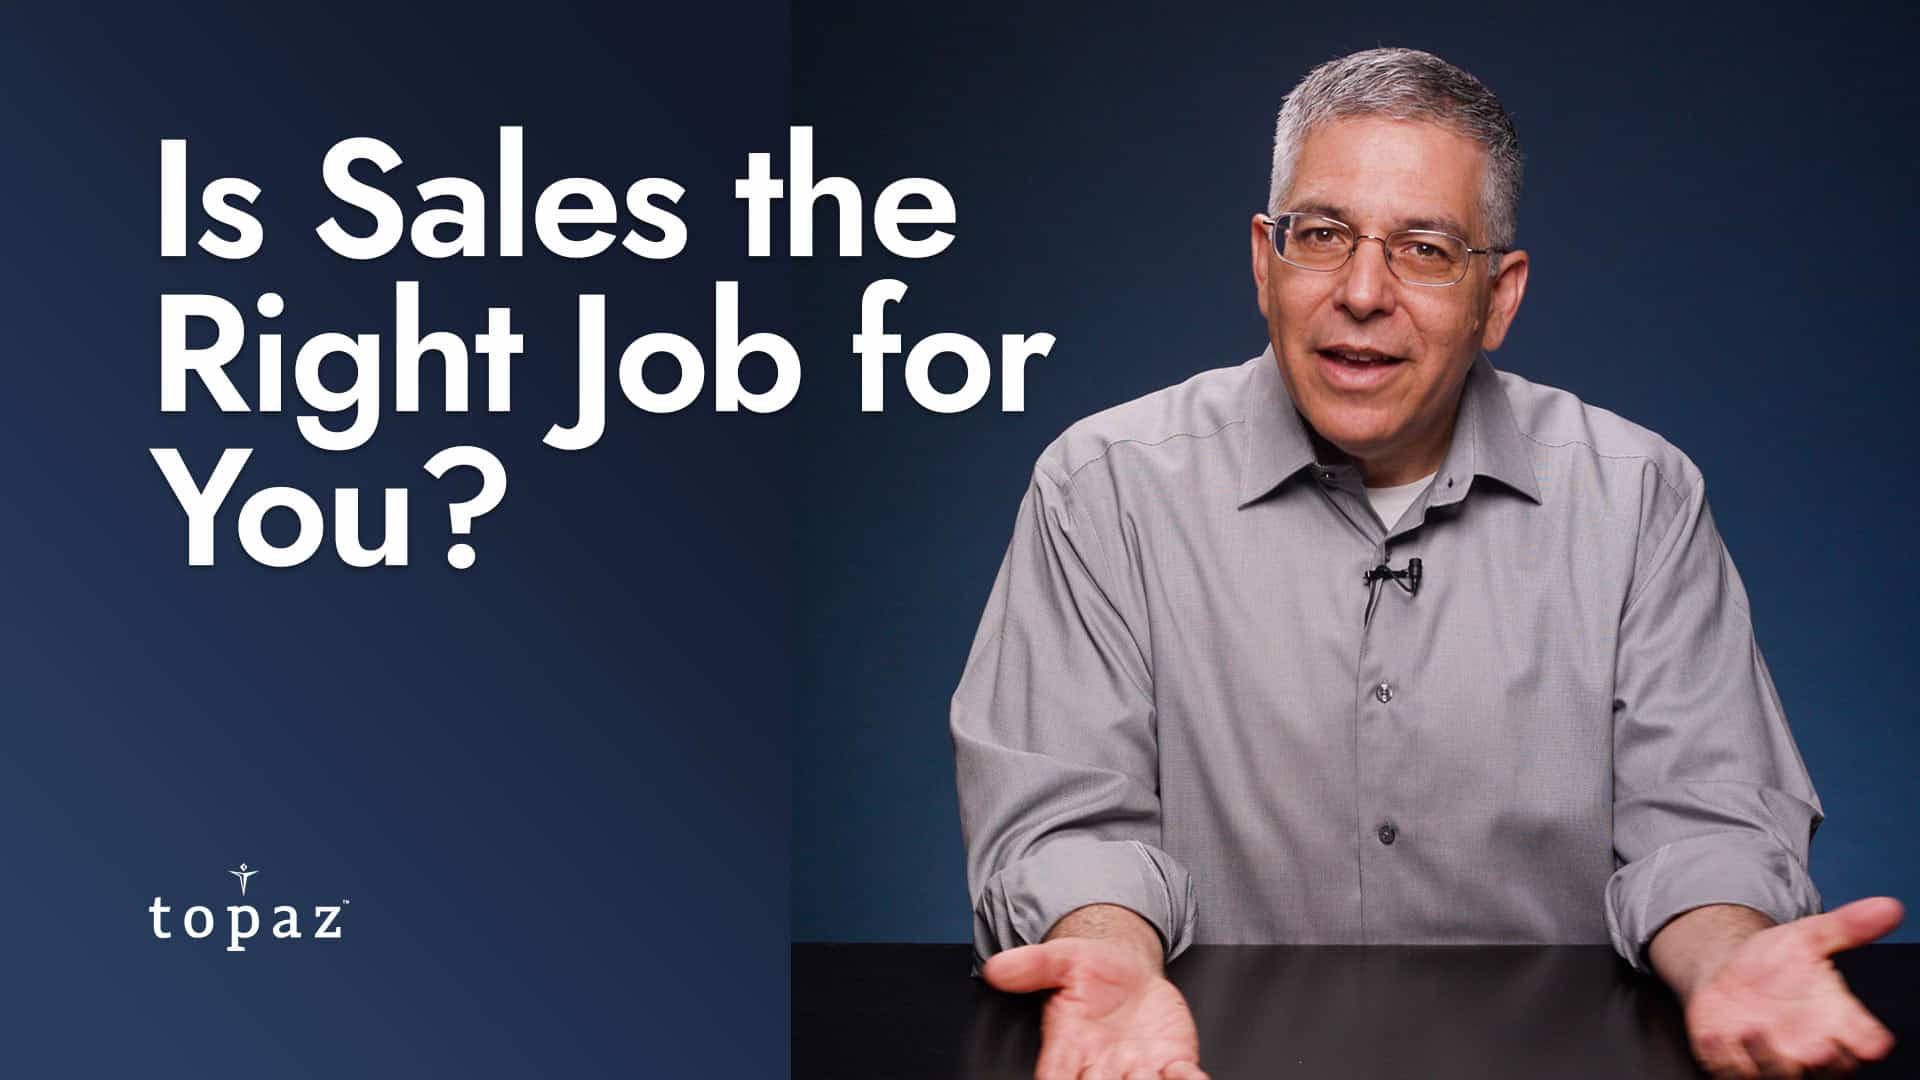 Jorge Chavez at a Desk with Headline: Is Sales the Right Job for You?